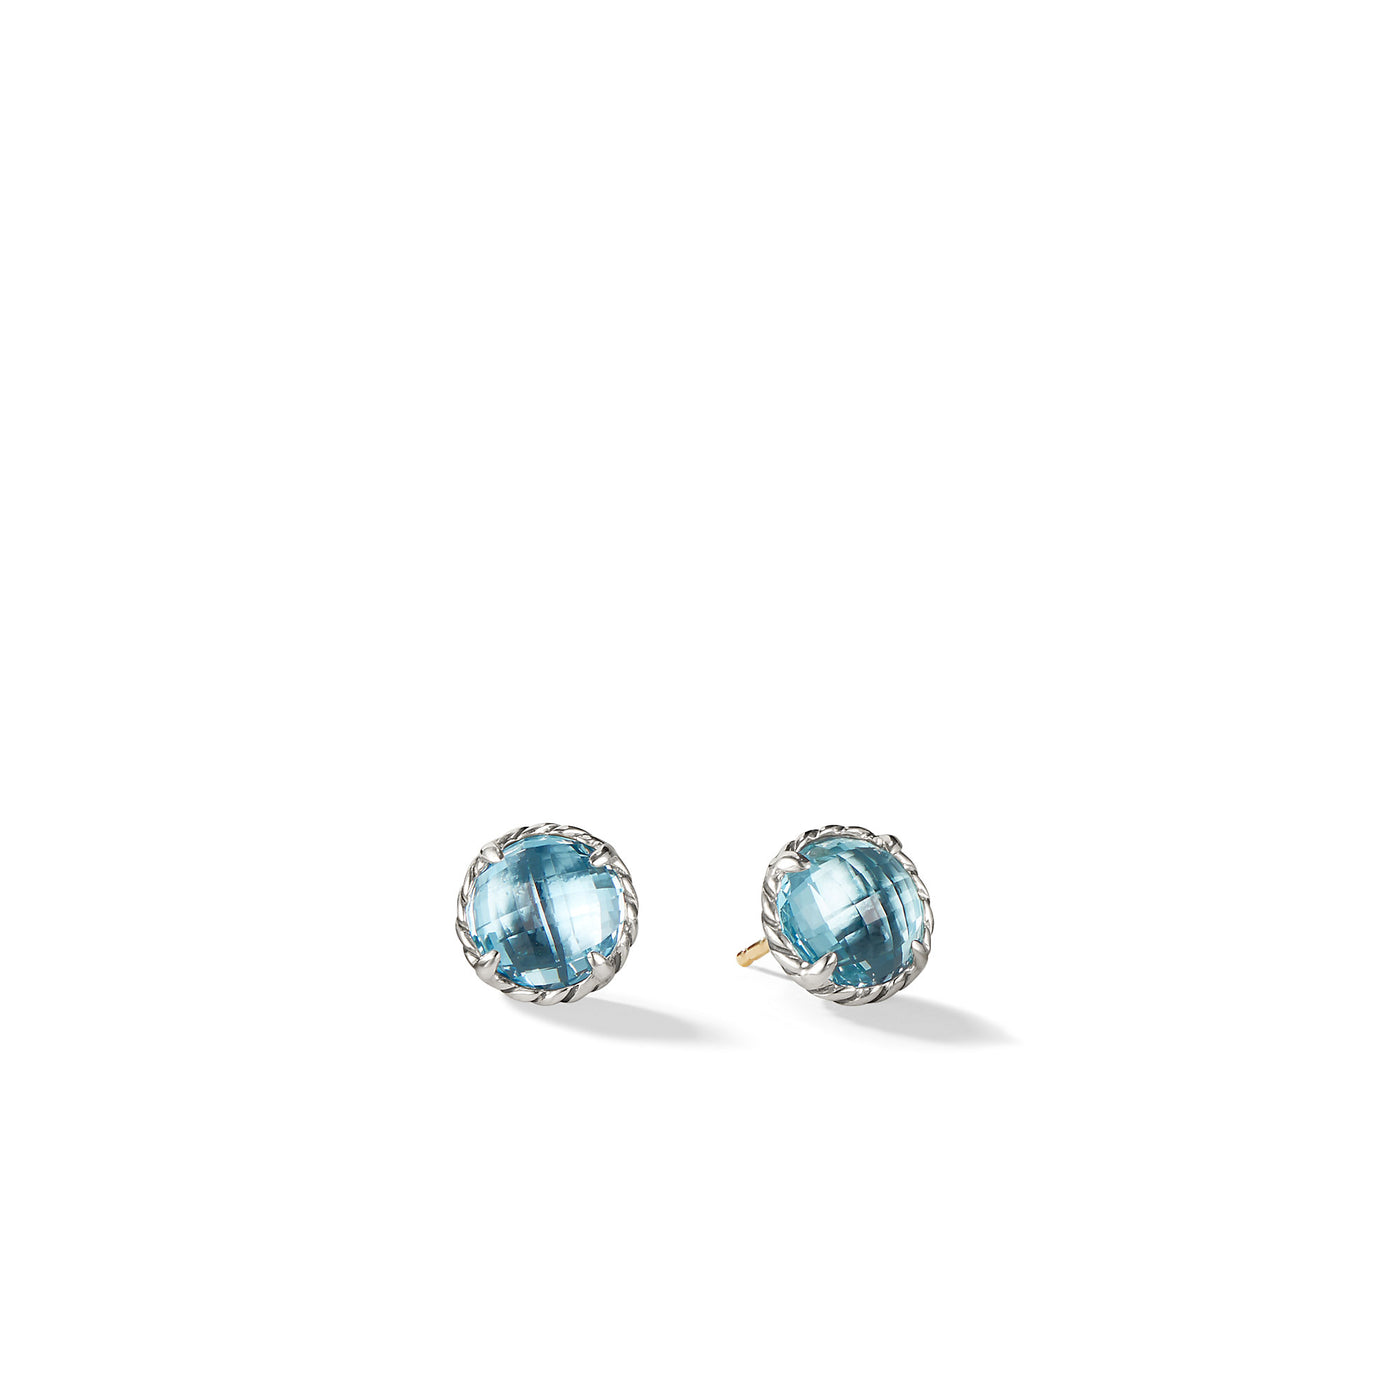 Petite Chatelaine® Stud Earrings in Sterling Silver with Blue Topaz\, 8mm